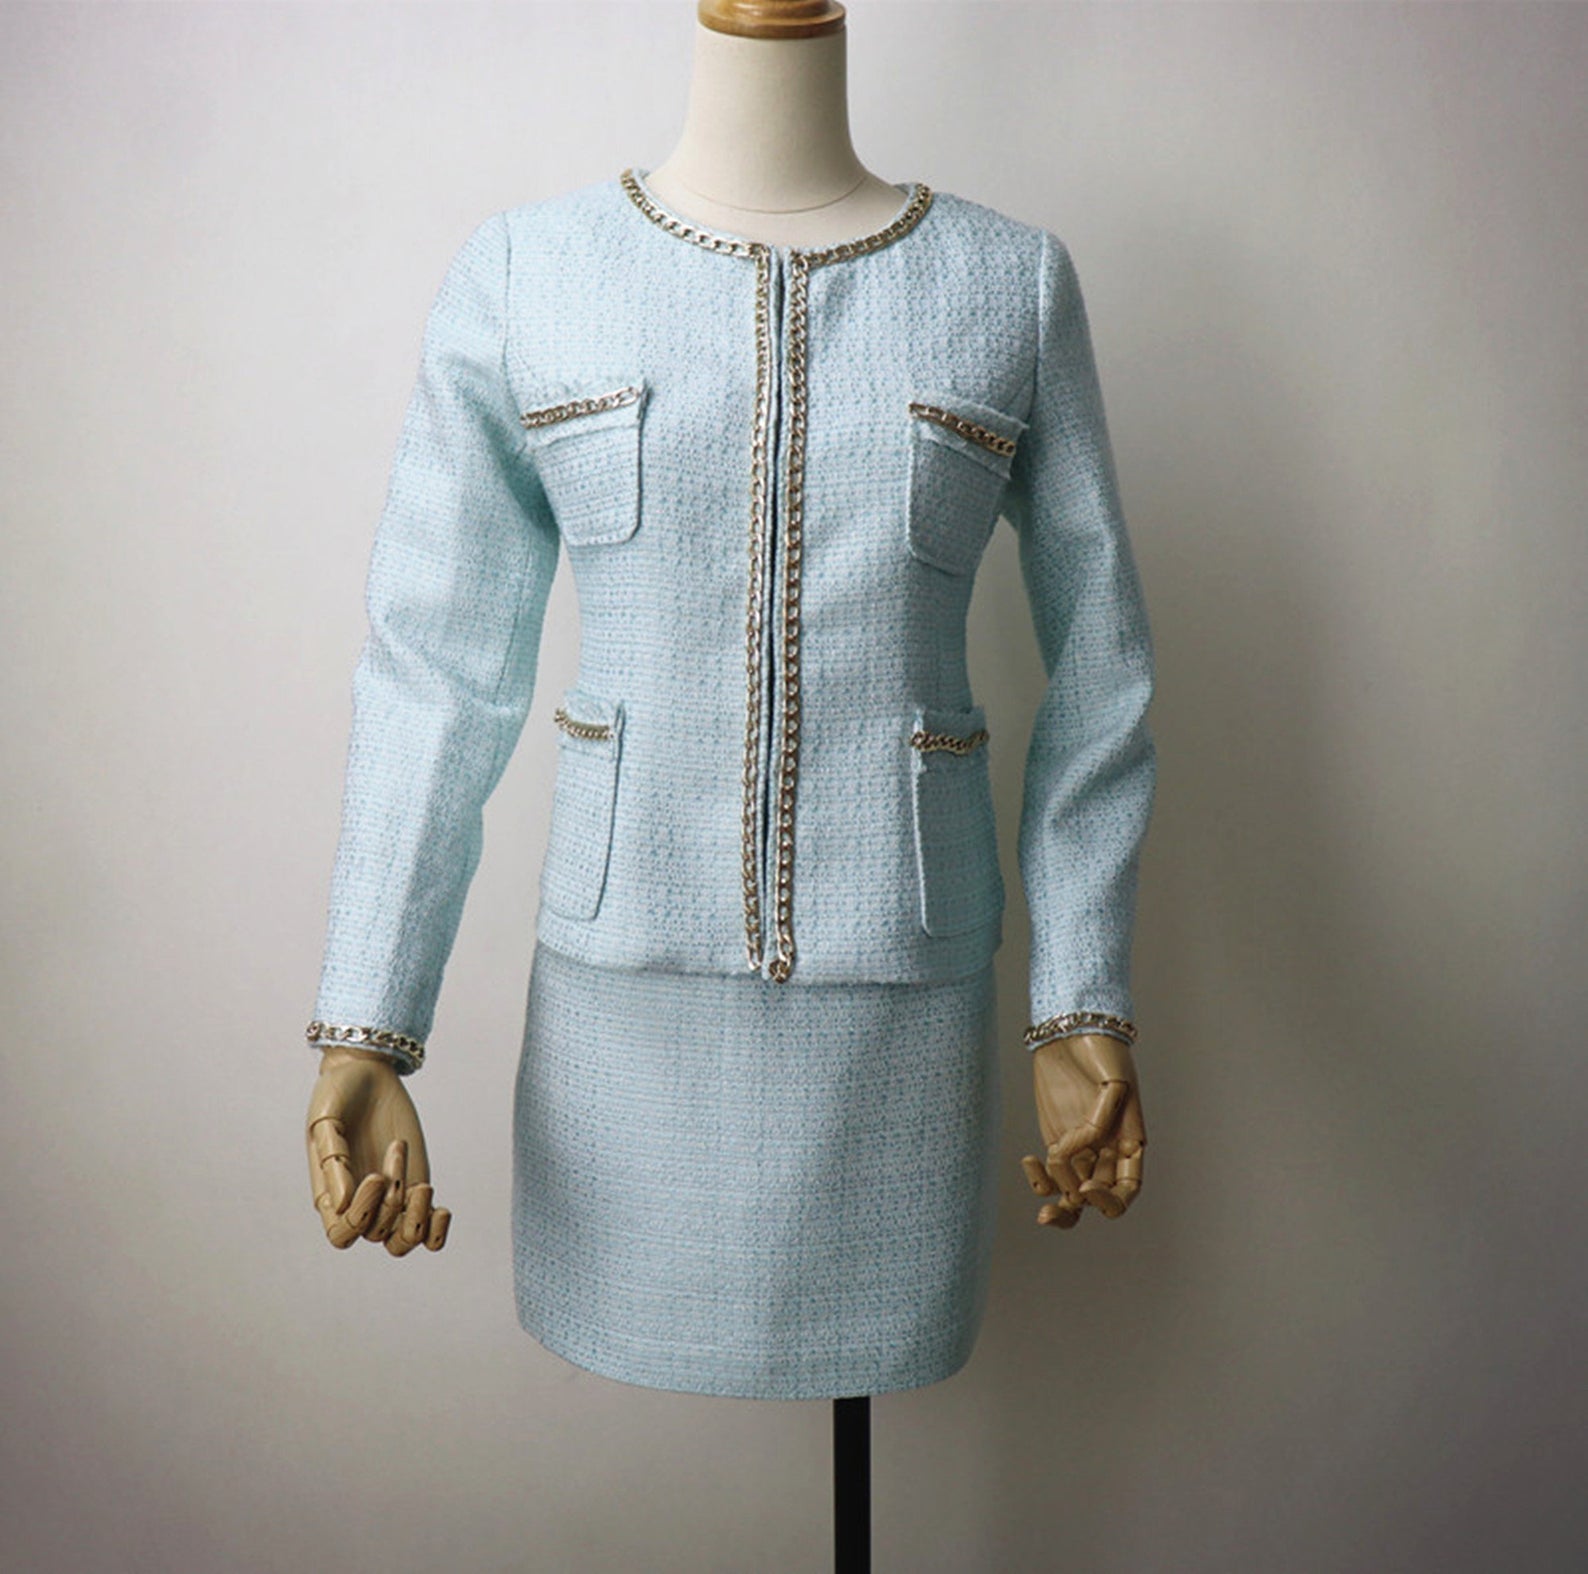 Tailor Made Suits for Women Chain Decoration Tweed Blazer + Skirt Suit - Sky Blue suit and skit with round neck and chain decorated for arm and pocket. We customize everything according to your measurements because we want to make sure your suit fits you perfectly. We create garments that are a perfect fit and deliver it to your door.